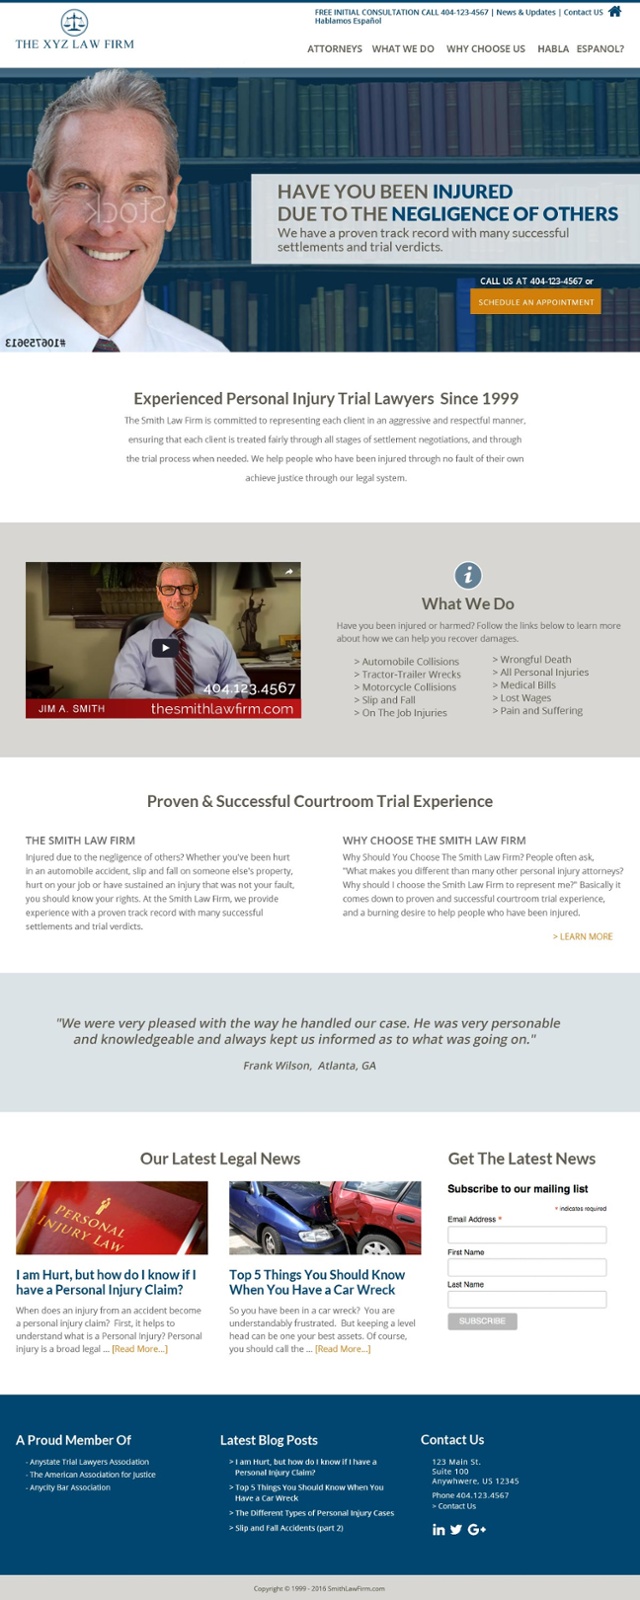 the smith law firm redesign 2